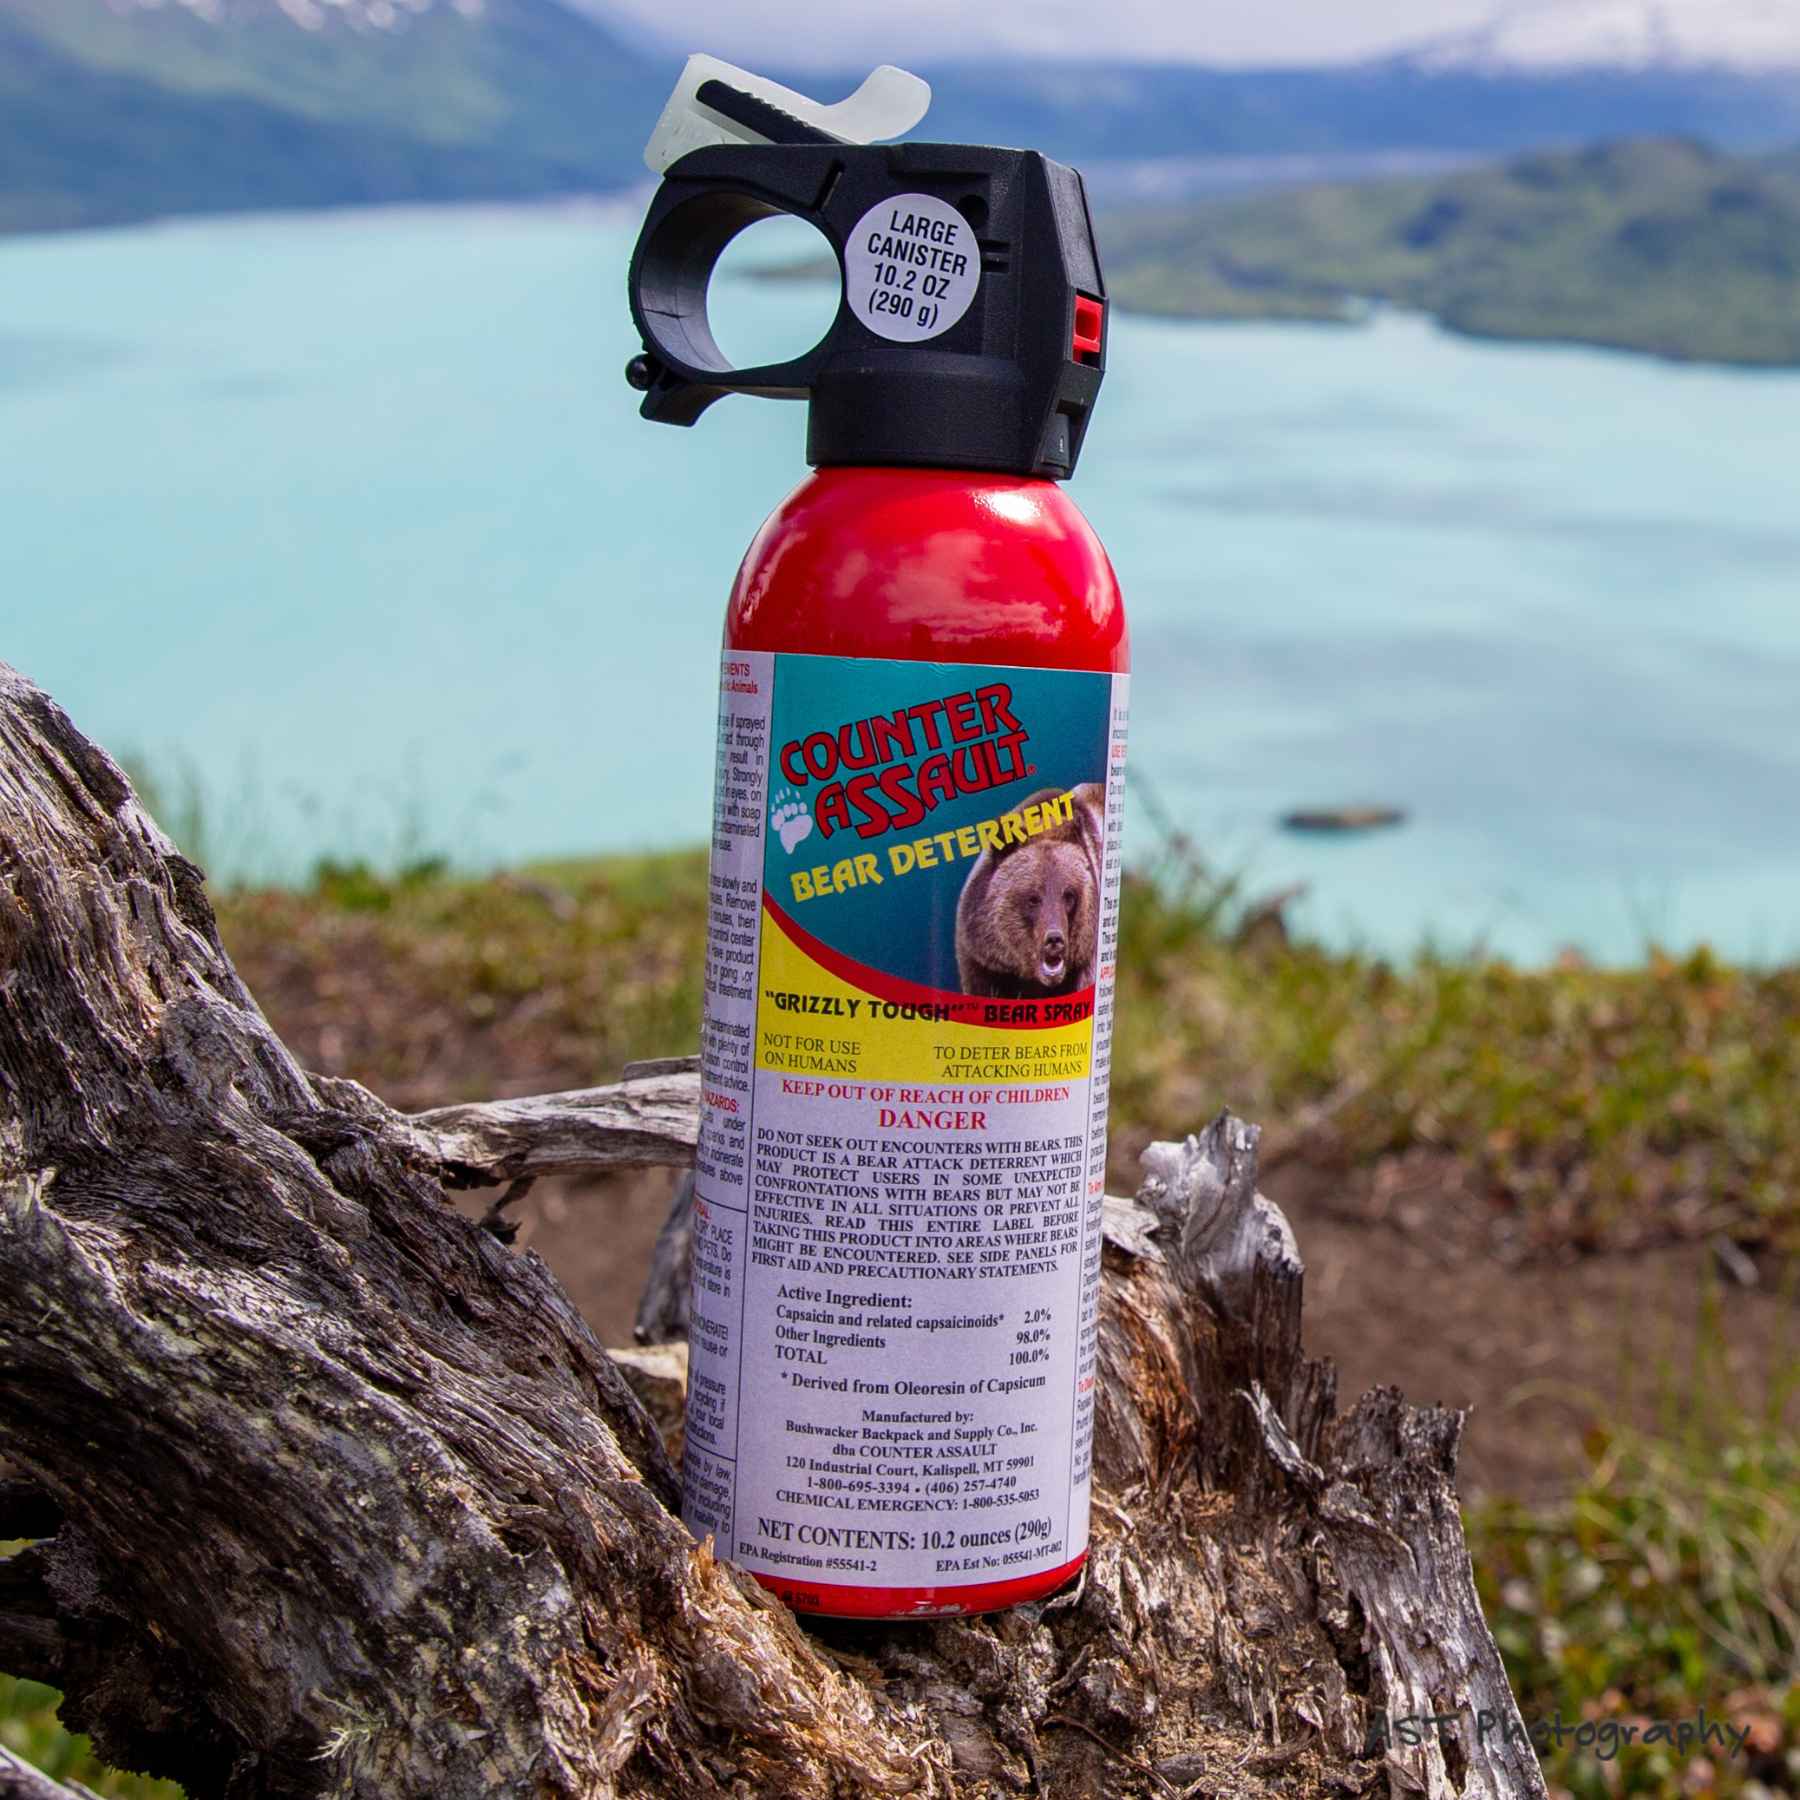 Counter Assault bear deterrent spray placed on a tree